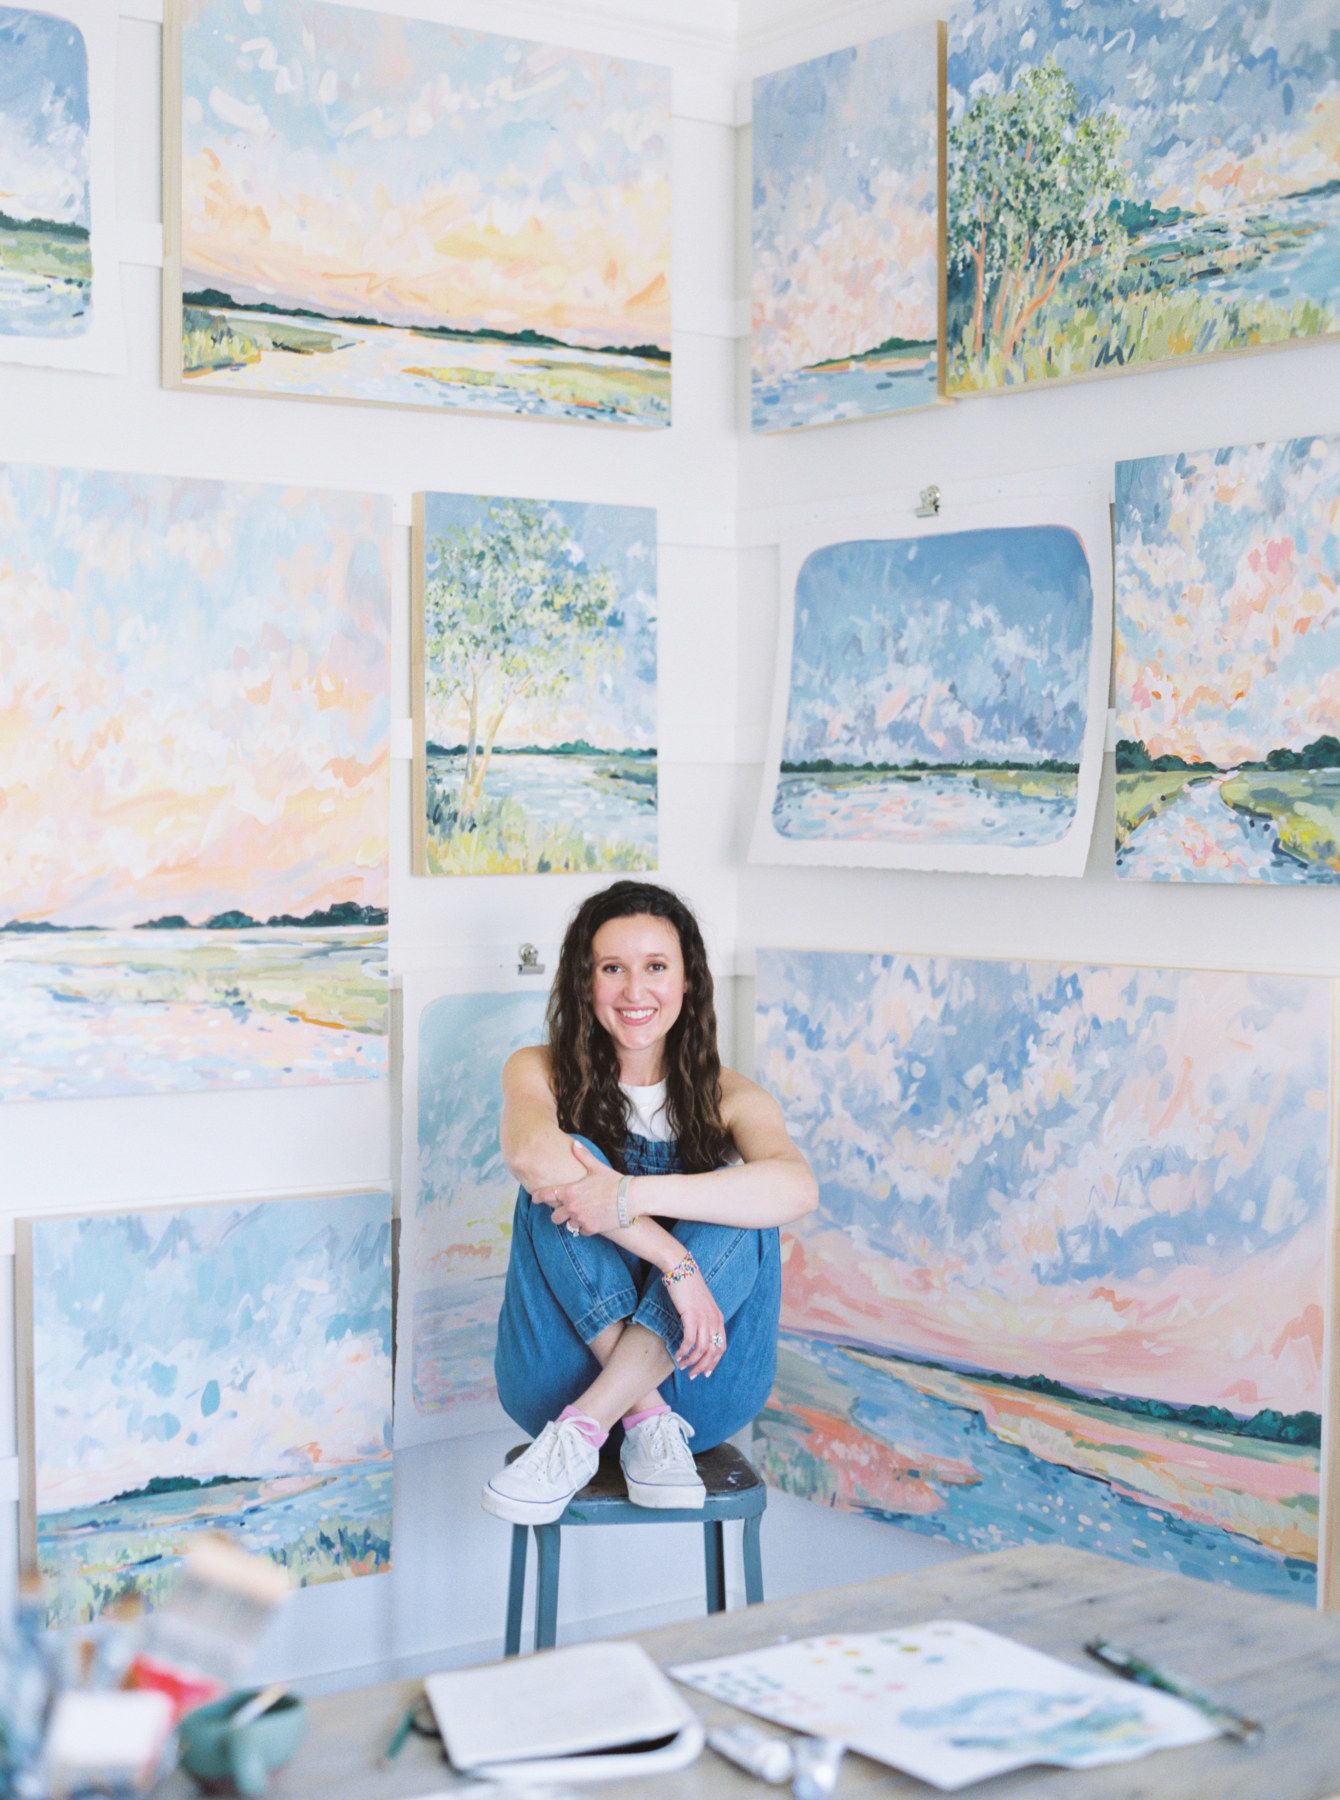 Photo of Sarah Jane Tart in her art studio surrounded by coastal paintings.